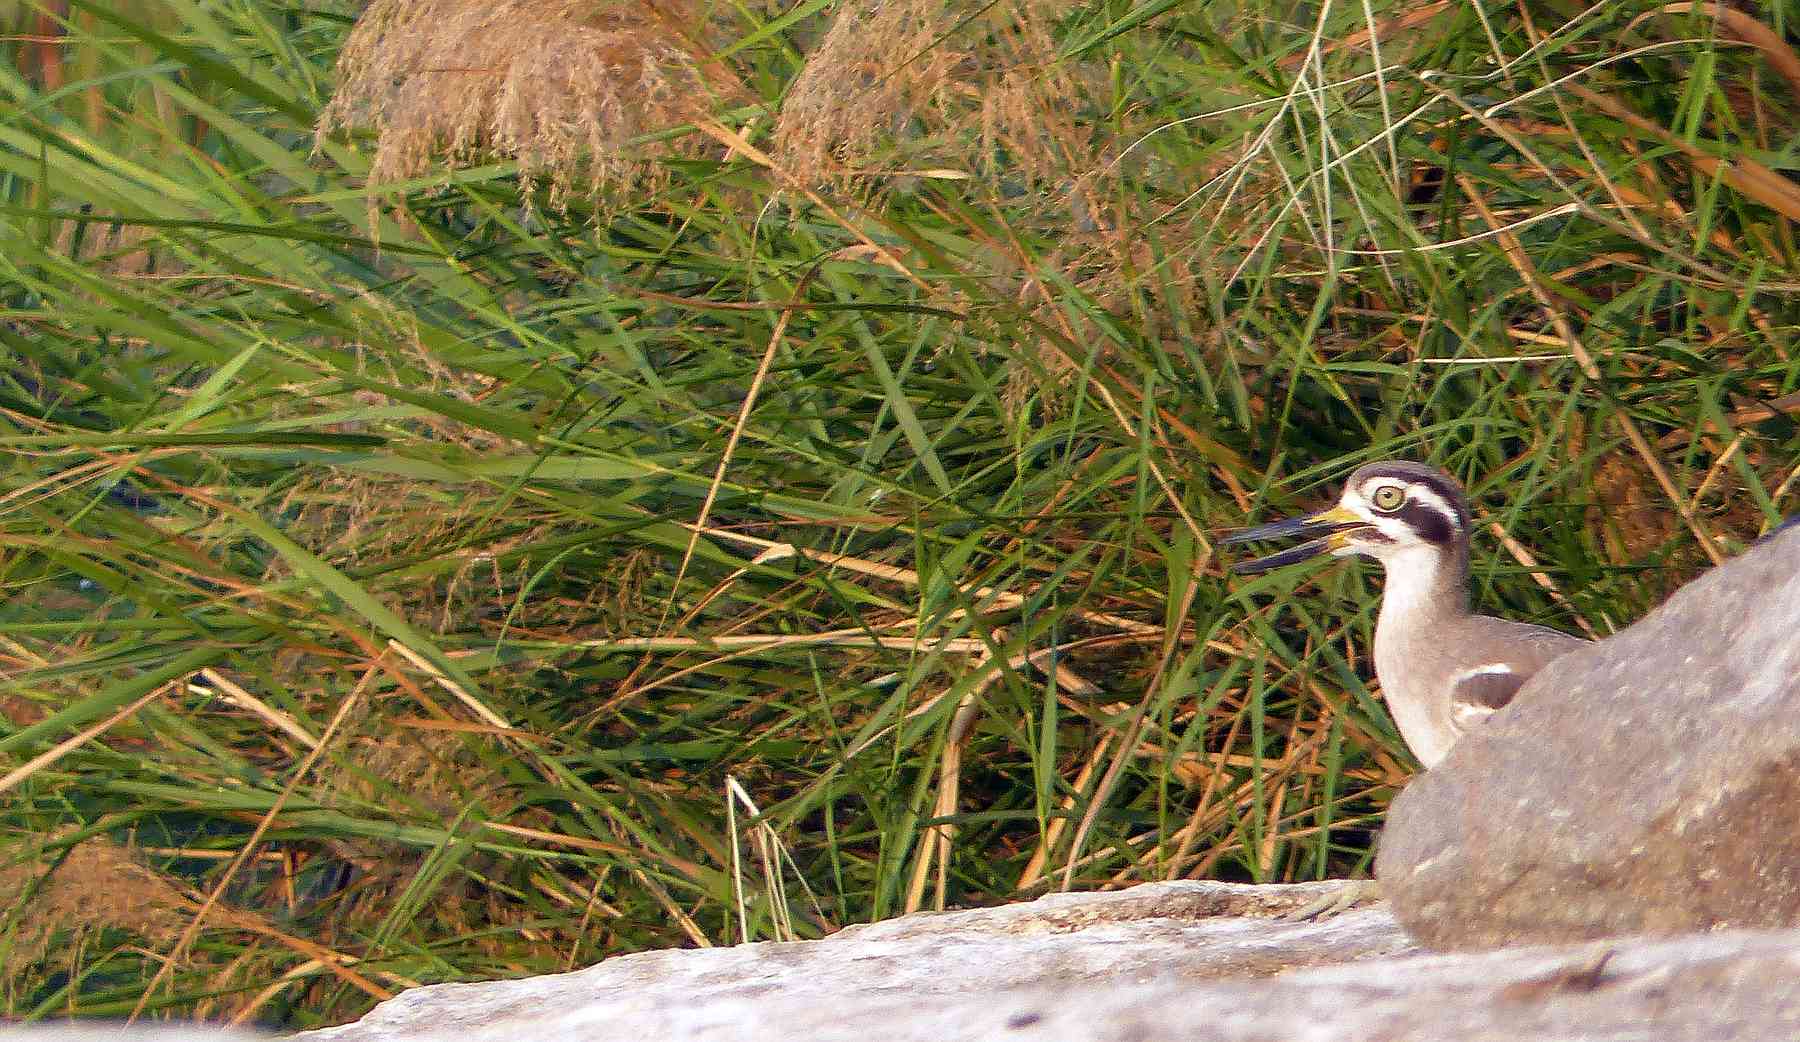 A reedy whistling gave away the location of this Greater Thick-knee, also known as Great Stone-Curlew